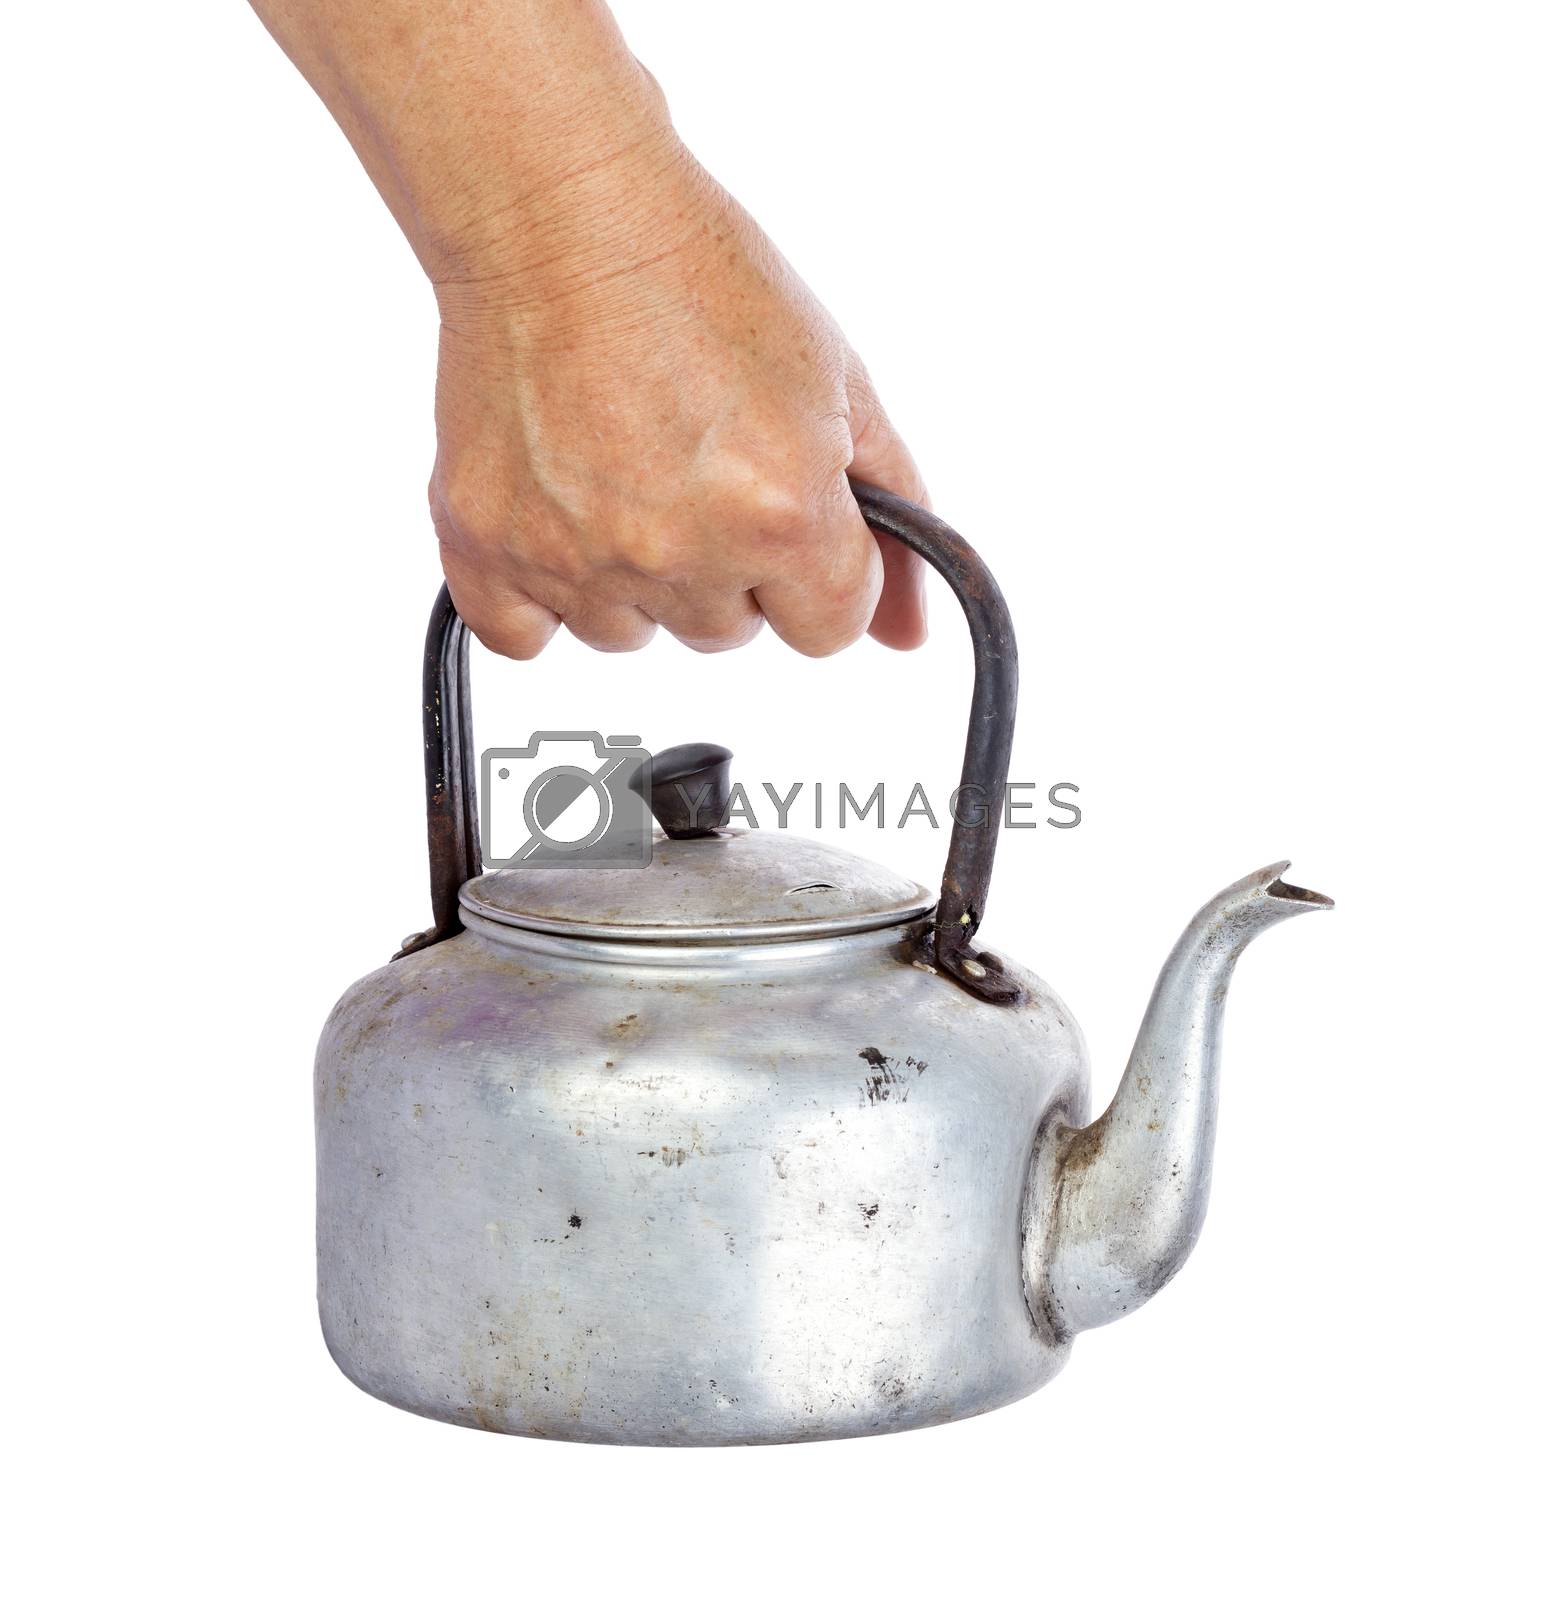 Royalty free image of old dirty classic aluminum kettle holding in hand isolated on wh by supersaiyan